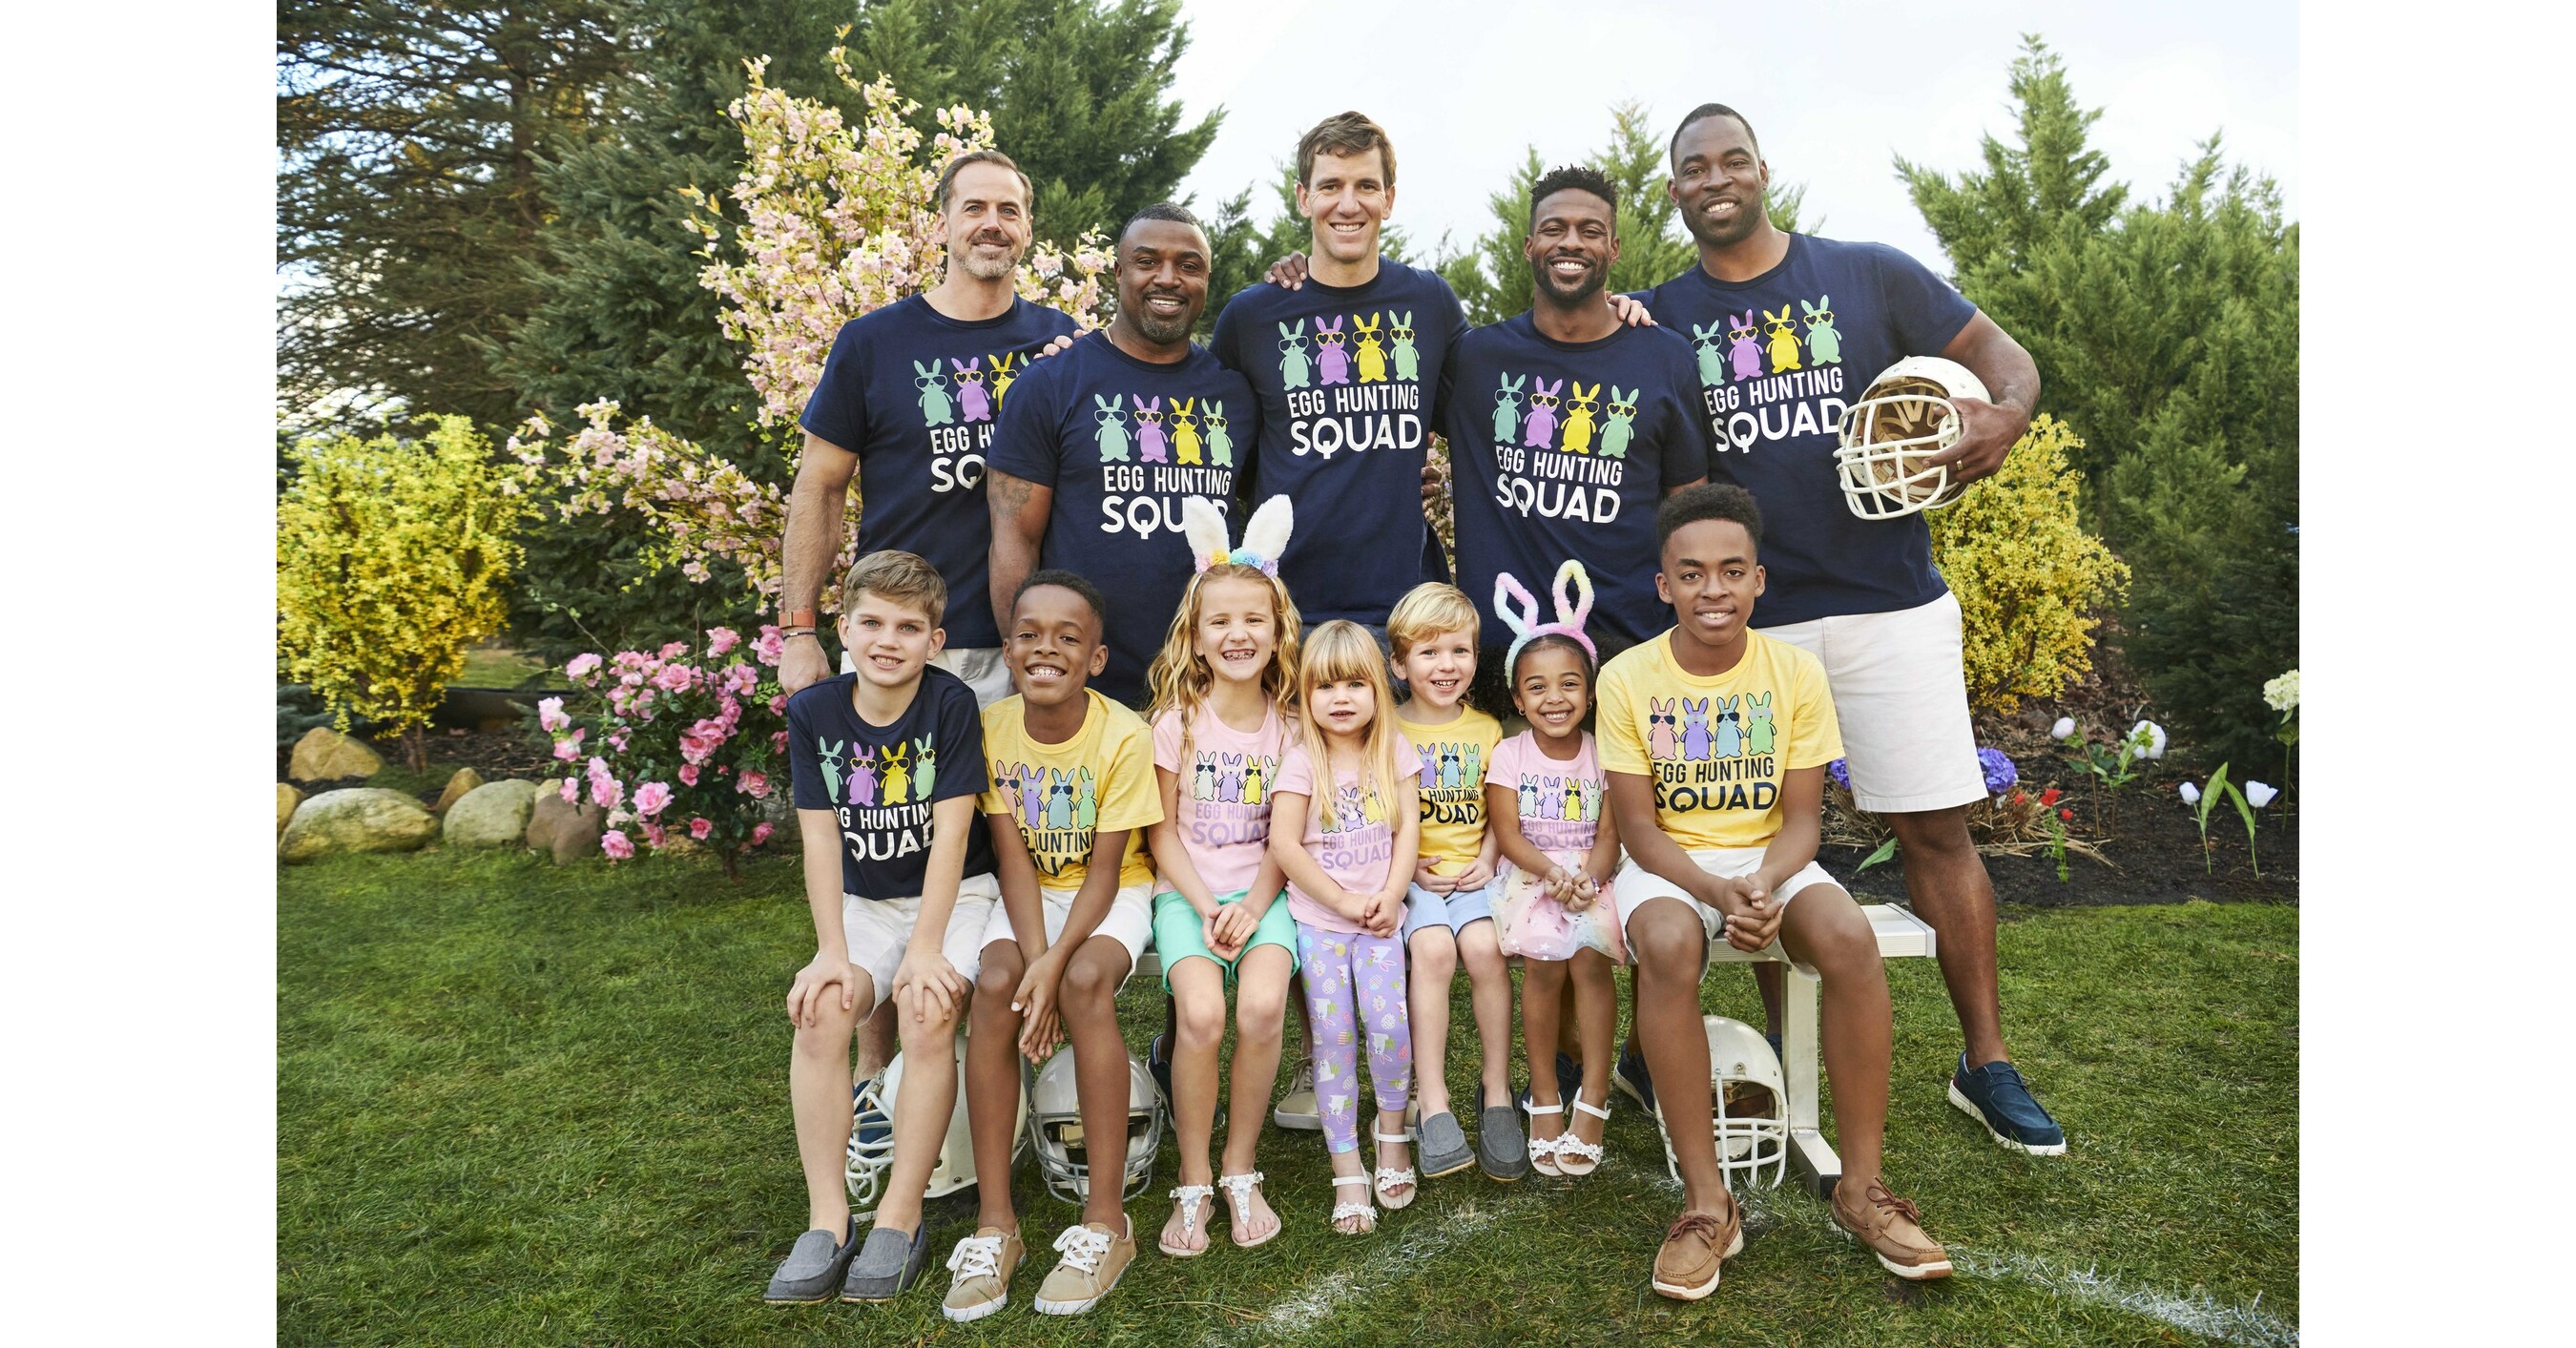 The Children's Place Teams up with Eli Manning, Shaun O'Hara, Justin Tuck,  Emmanuel Sanders, Brian Westbrook & Their Families, Scoring a Touchdown  with its Spring 2023 Campaign